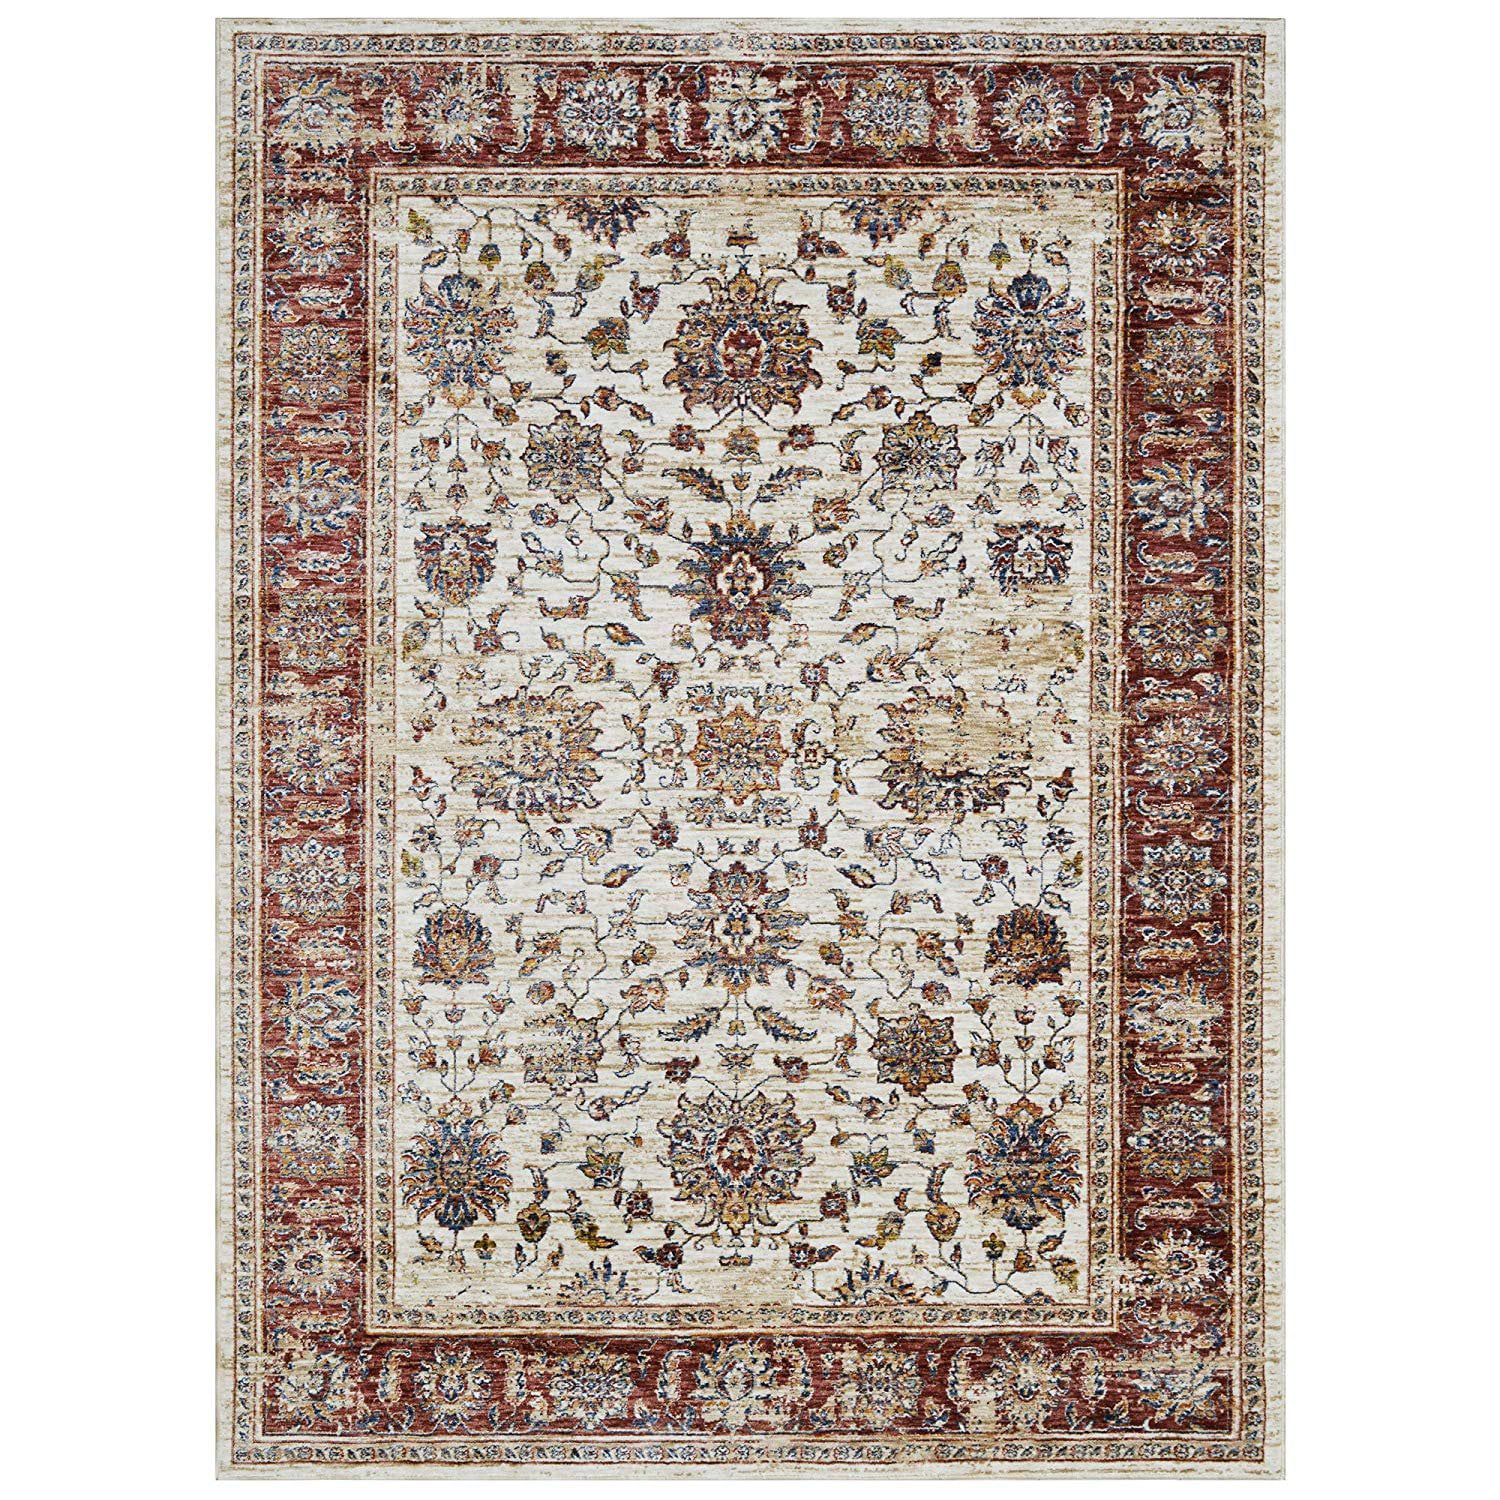 HR-Traditional Rugs/bijar Collection/Fashion Home Oriental|Persian Vintage Area Rugs-Distressed Copper/Multi 5'x7' 